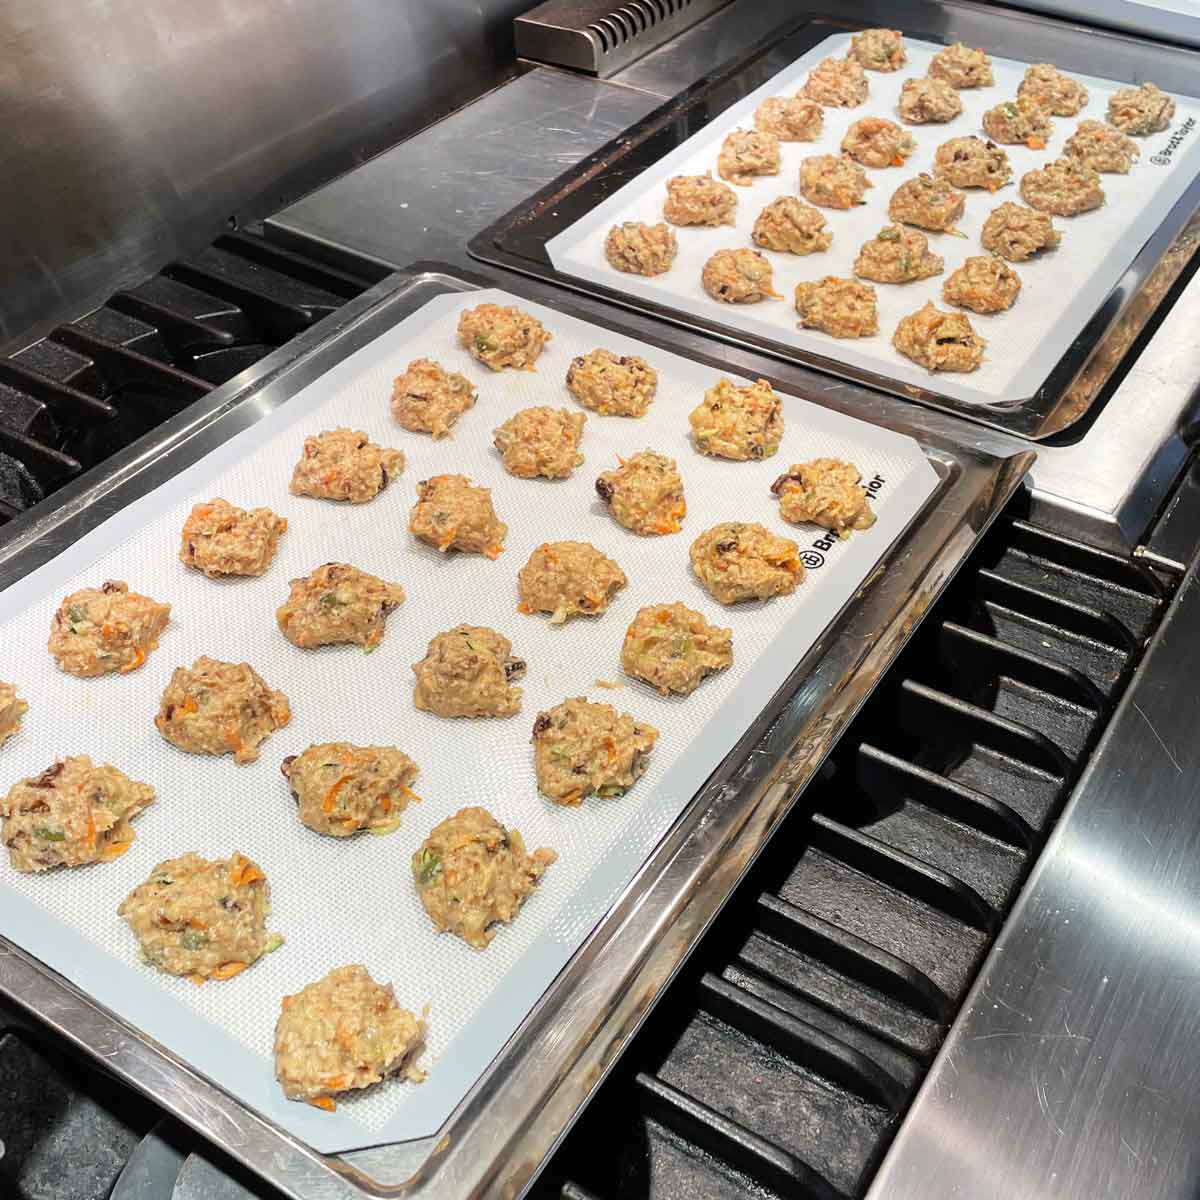 48 cookies dough spoon on to baking sheets